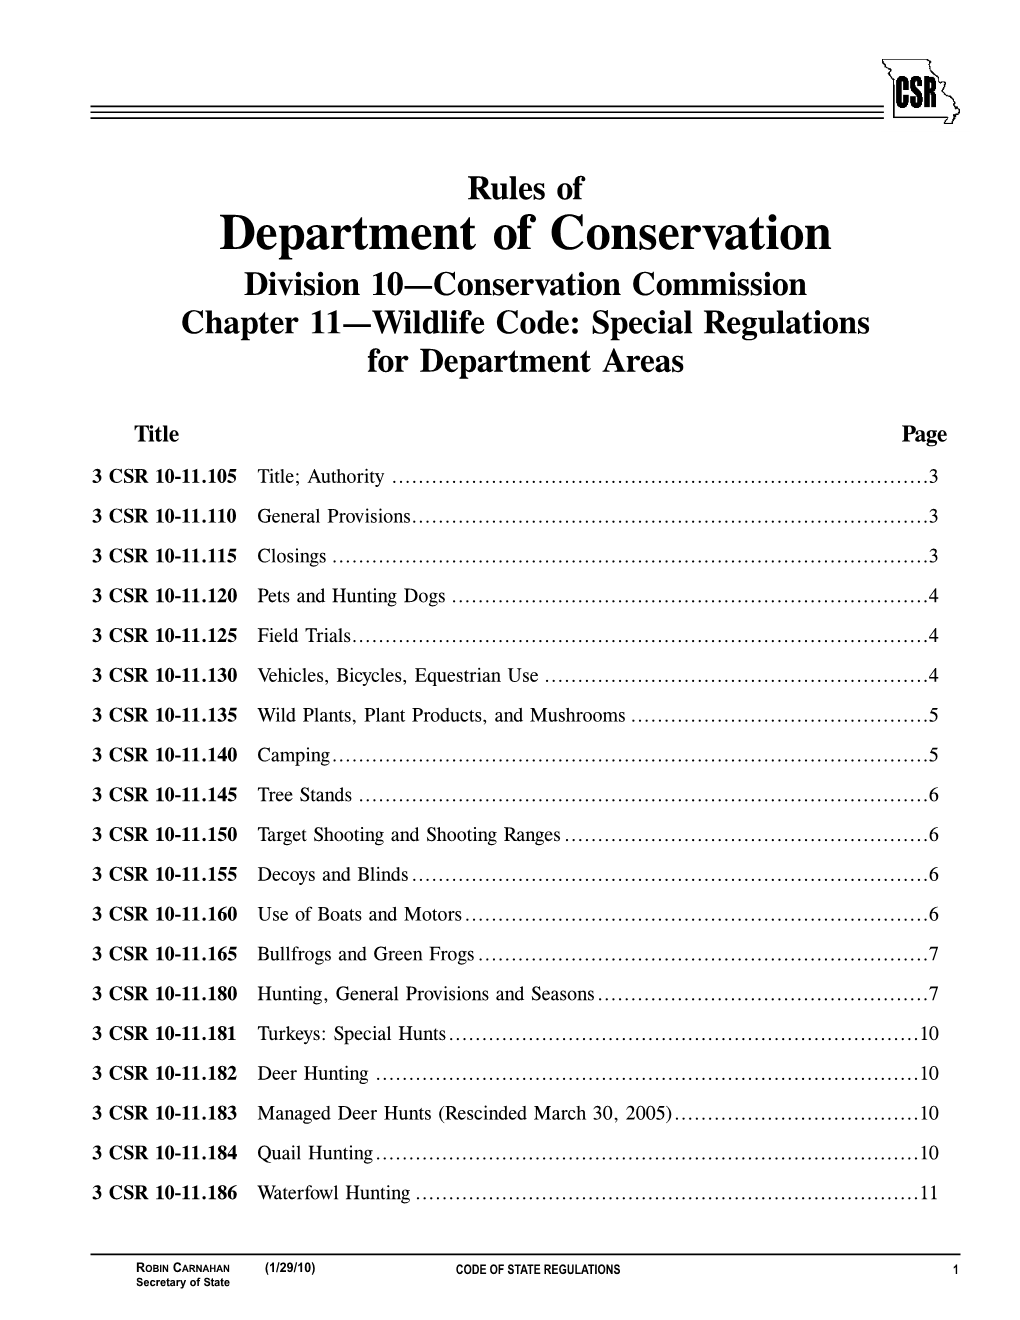 Department of Conservation Division 10—Conservation Commission Chapter 11—Wildlife Code: Special Regulations for Department Areas